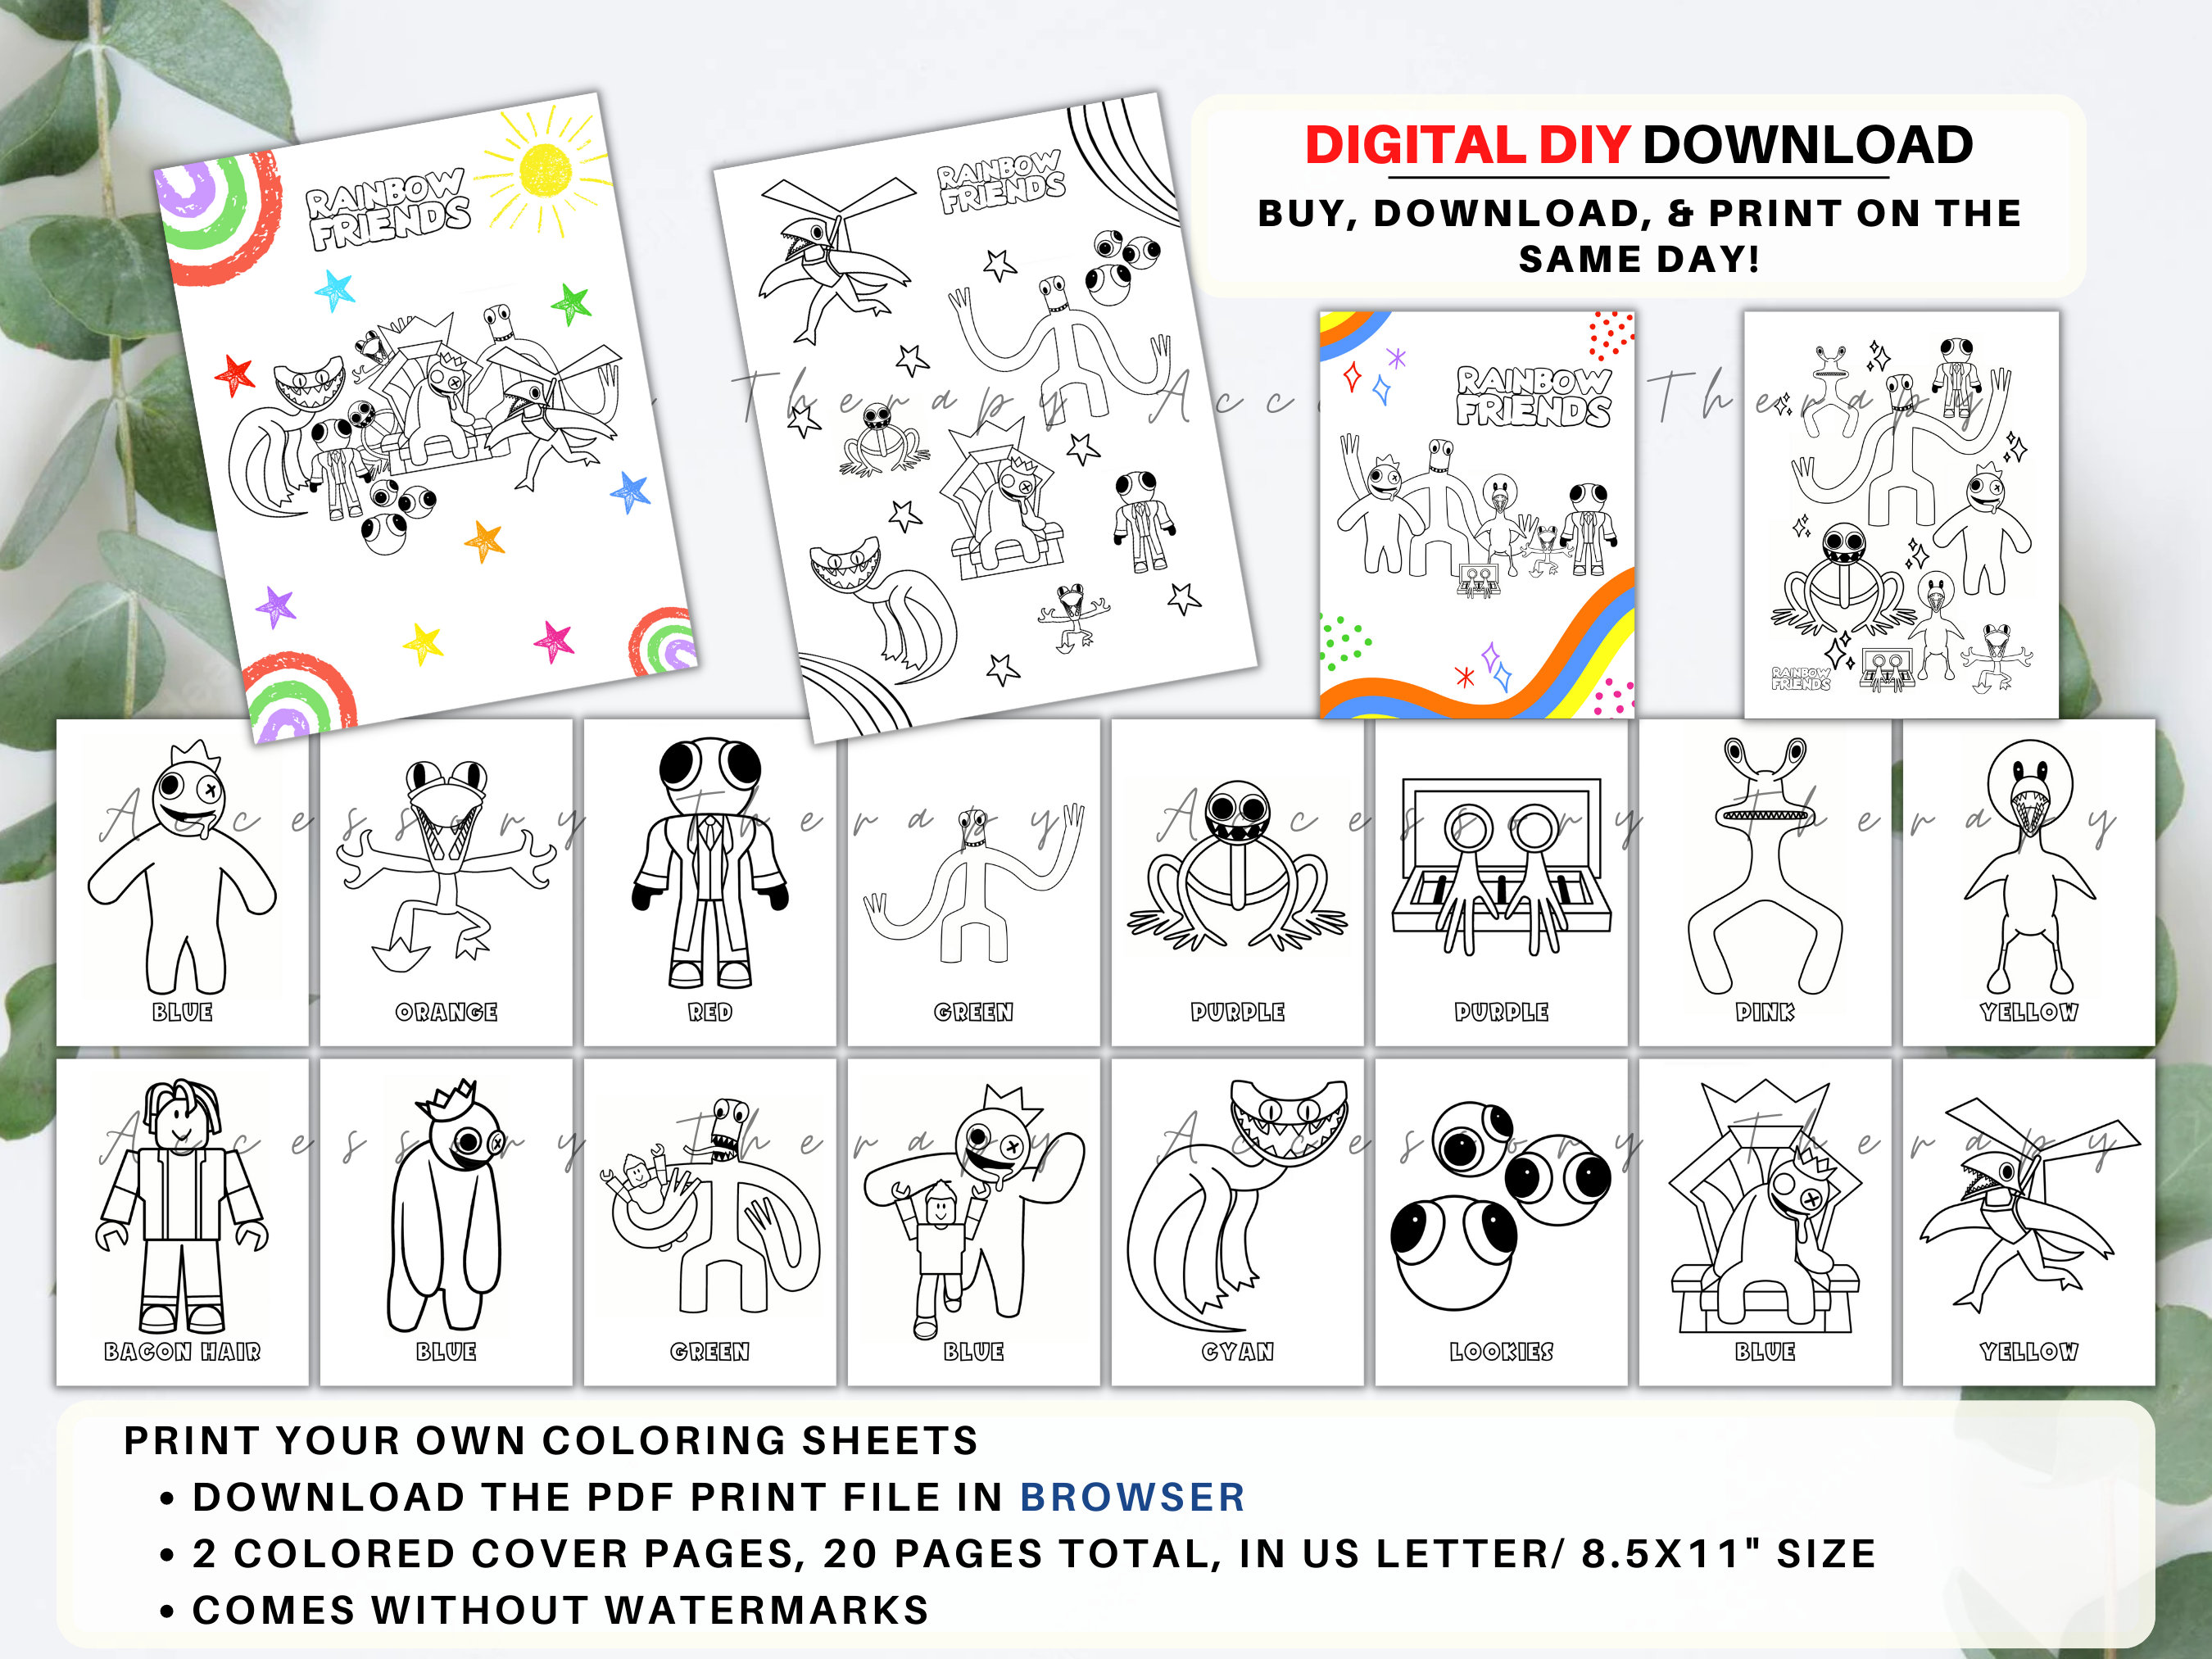 Updated latest chapter rainbow friends diy print your own coloring sheets booklet book coloring pages drawing digital download